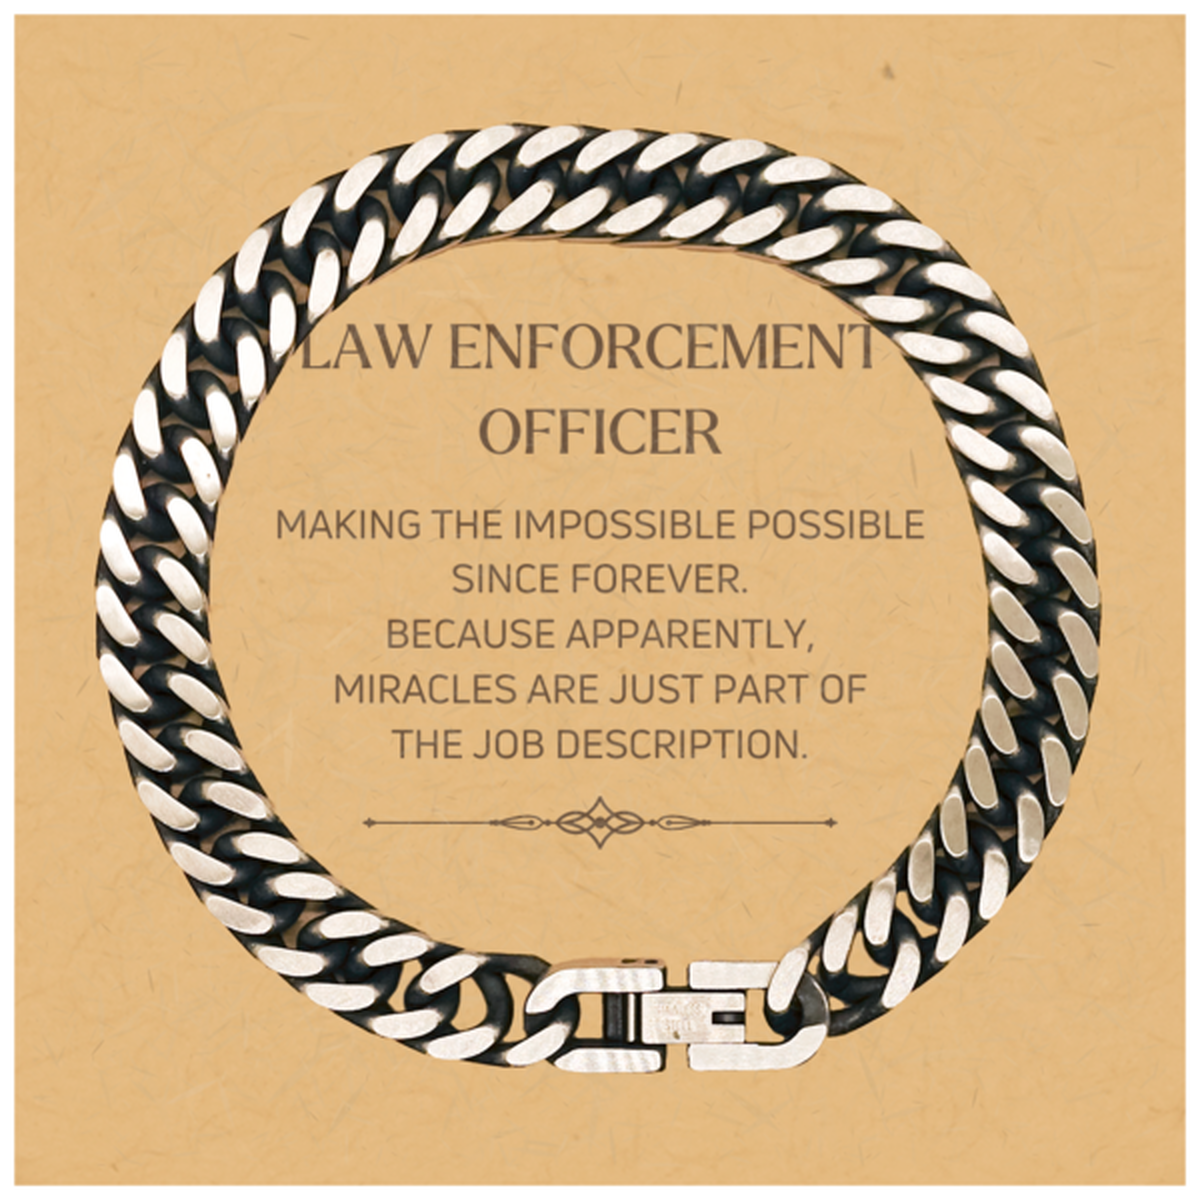 Funny Law Enforcement Officer Gifts, Miracles are just part of the job description, Inspirational Birthday Christmas Cuban Link Chain Bracelet For Law Enforcement Officer, Men, Women, Coworkers, Friends, Boss